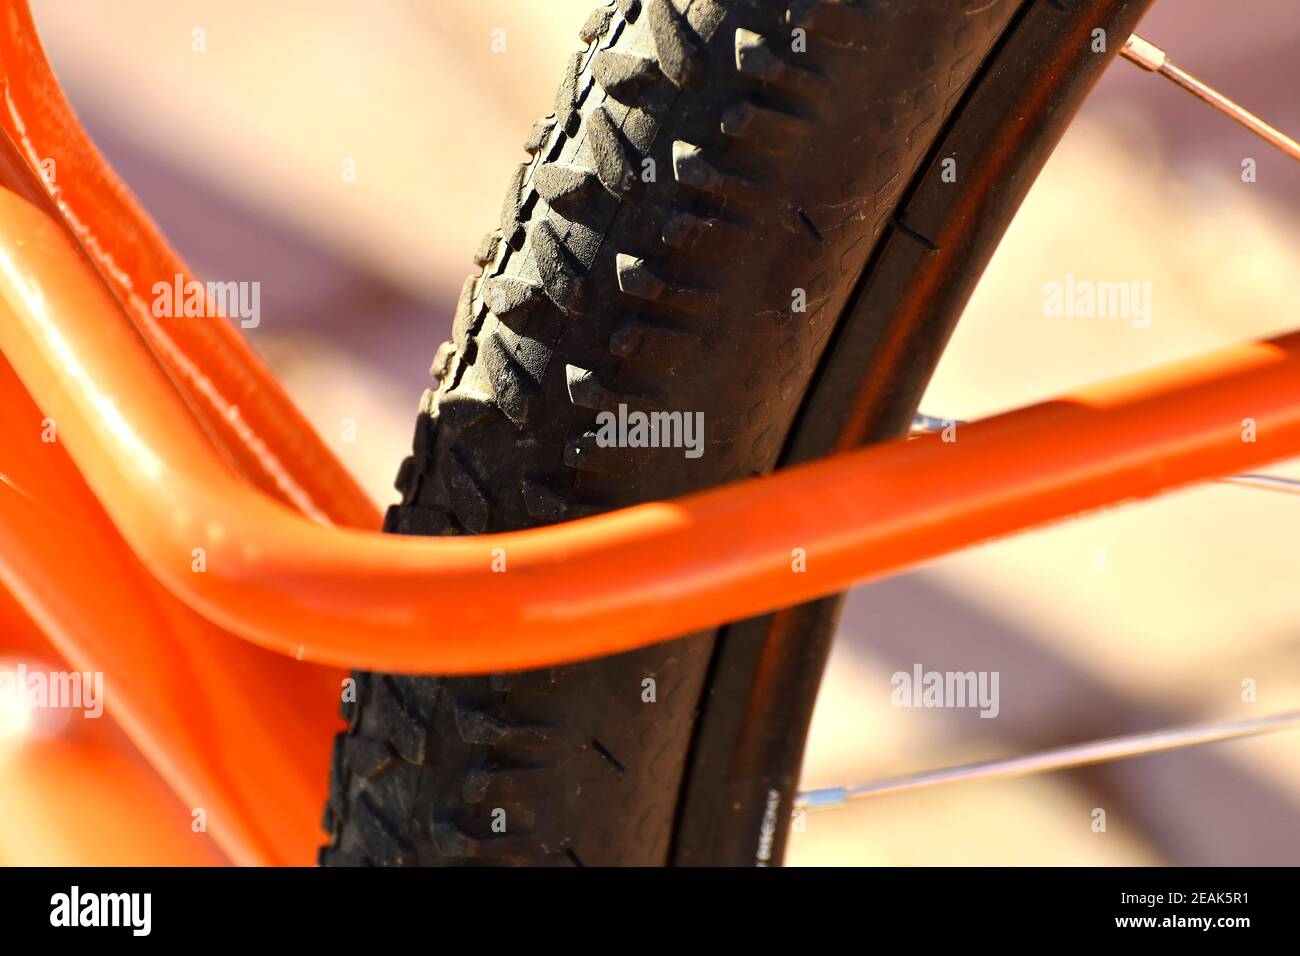 bicycle tyre in a bicycle stand Stock Photo